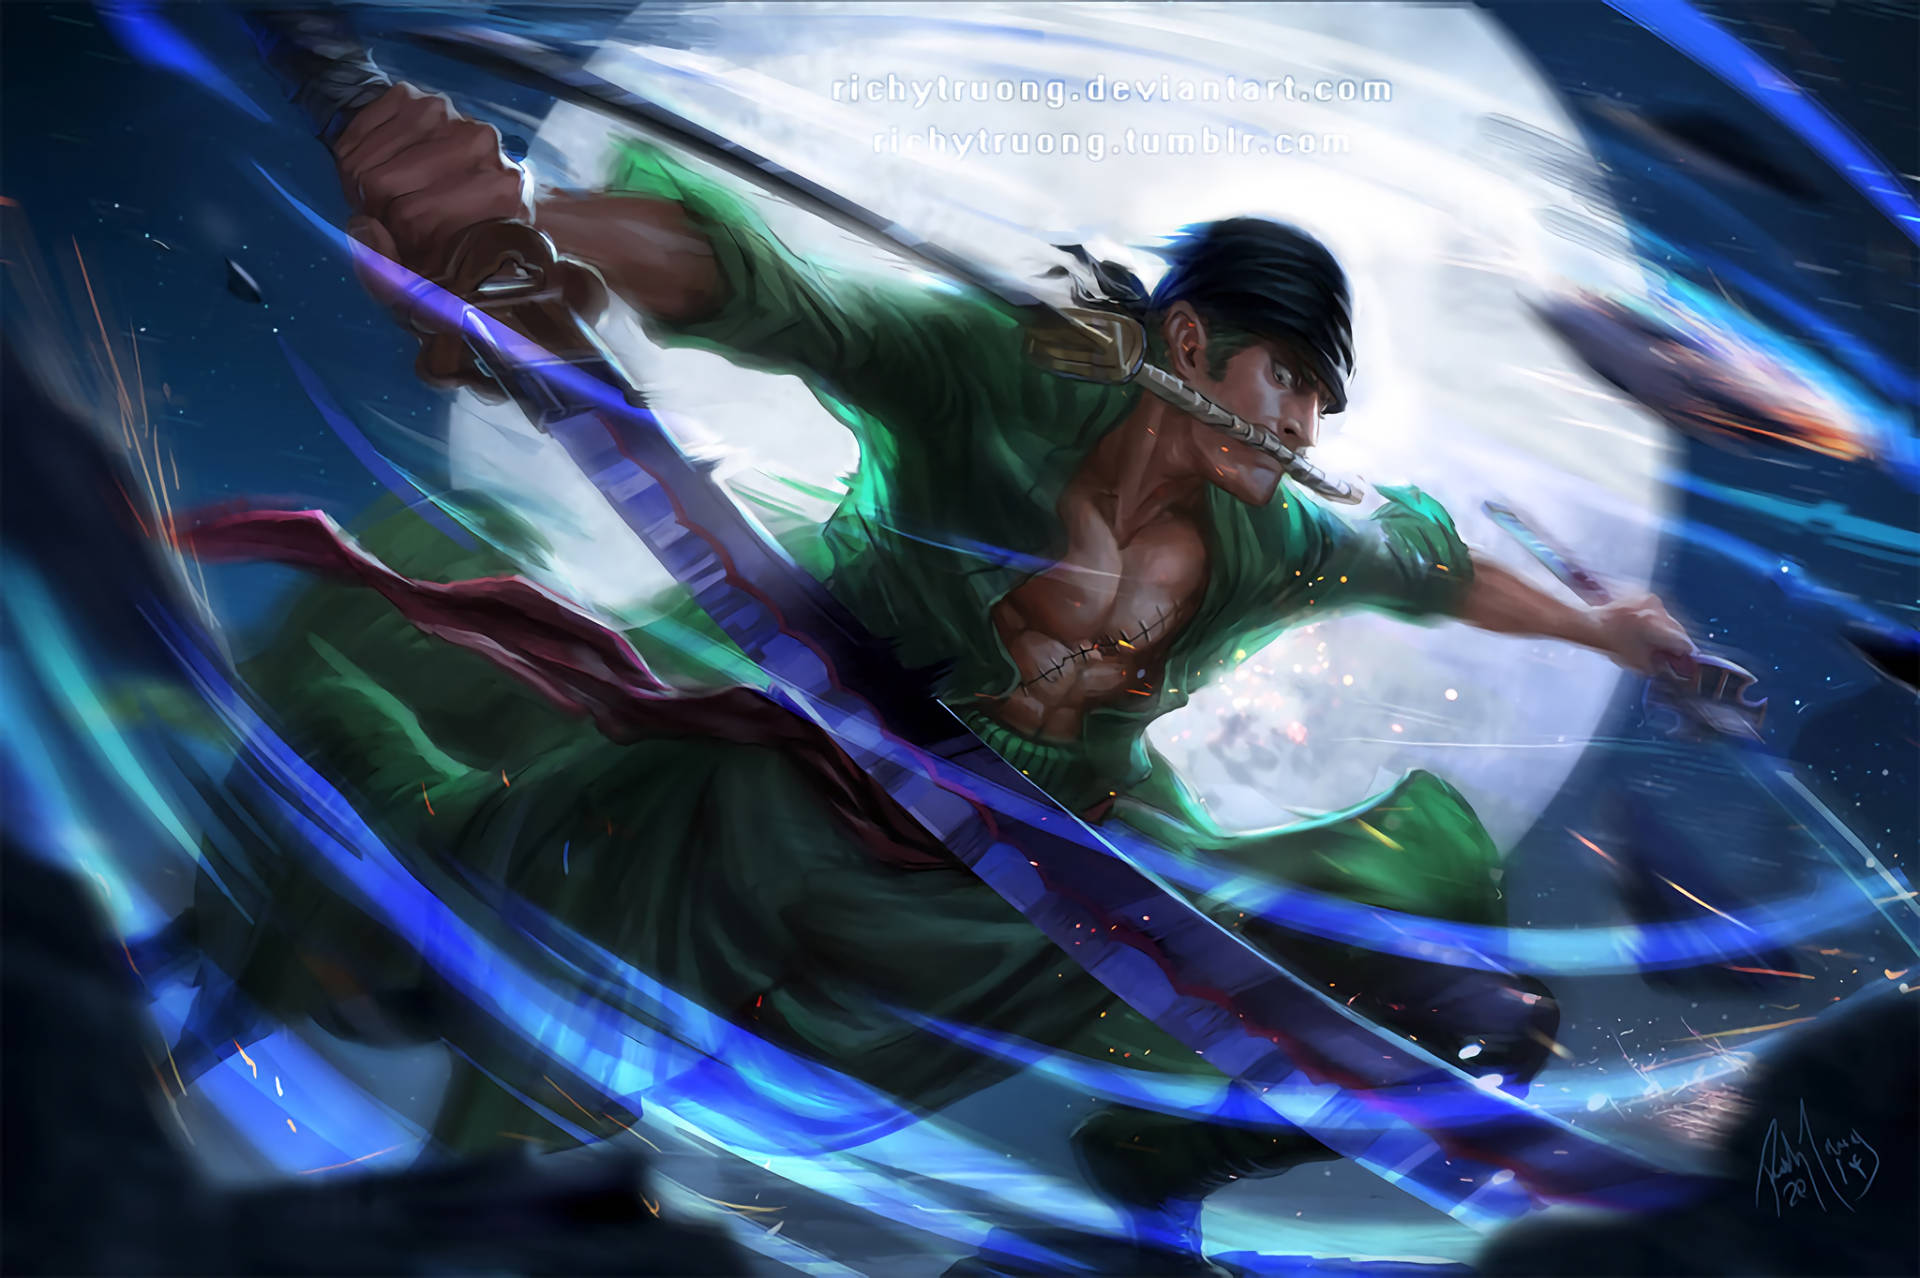 HOW TO GET 1-3 SWORD STYLES IN A ONE PIECE GAME! (Zoro Location) 